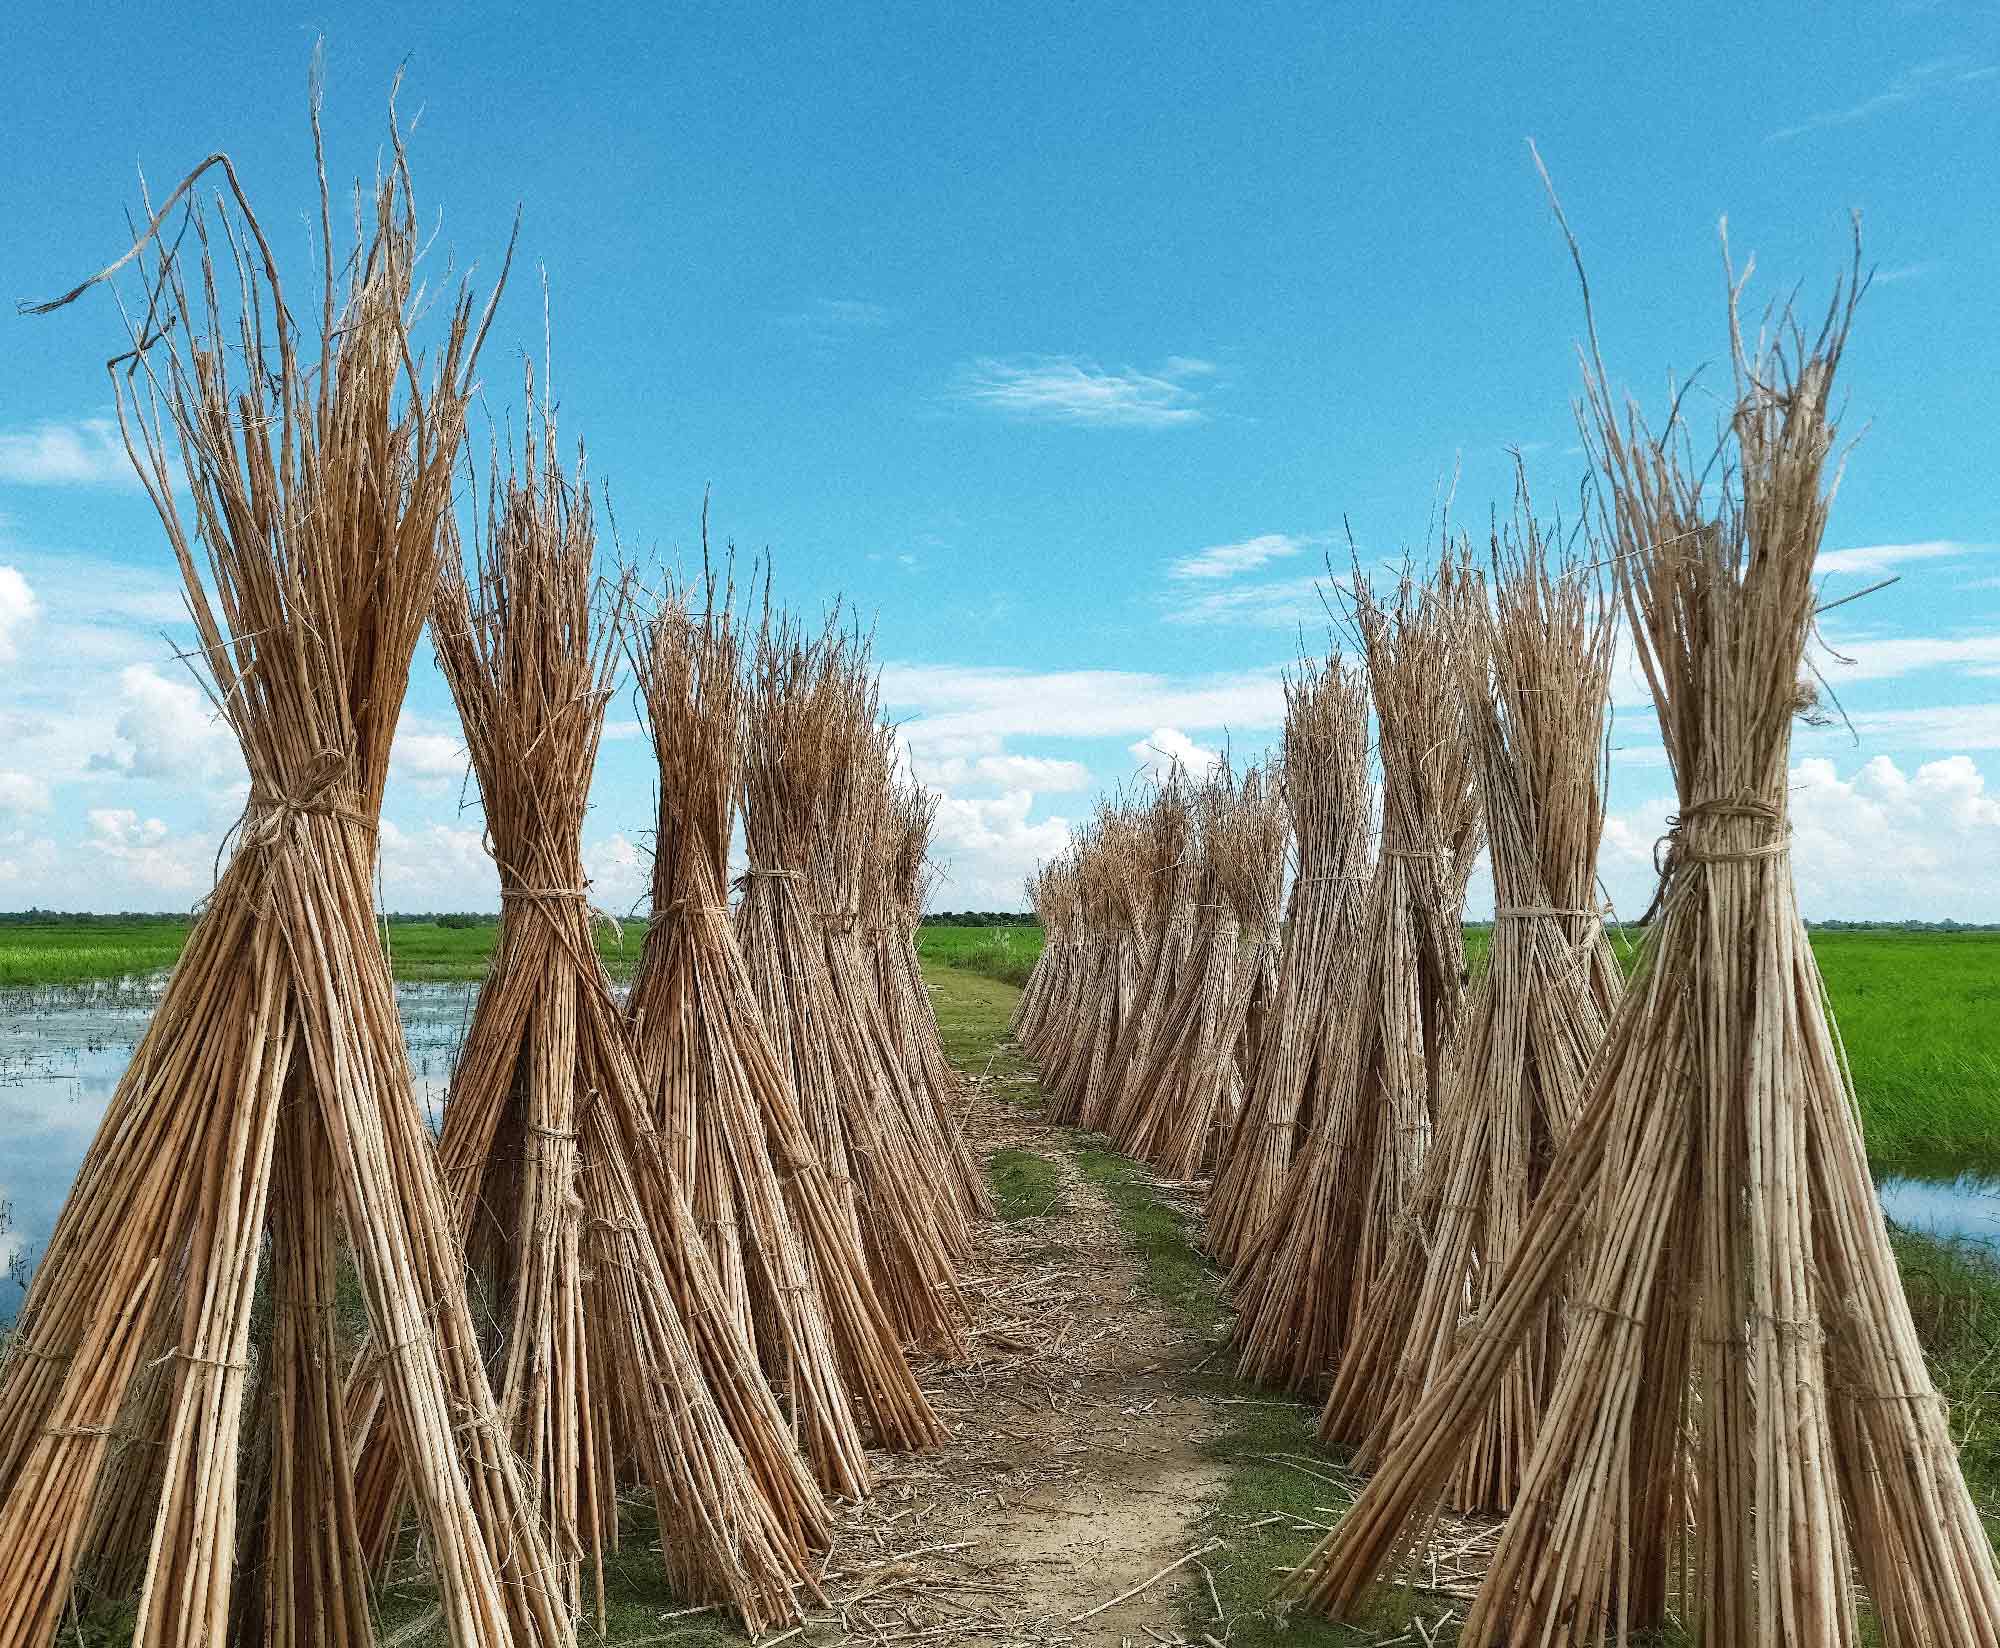 Two rows of earth friendly, tall upright stacks of drying jute fibers in a wetland. Blue skies